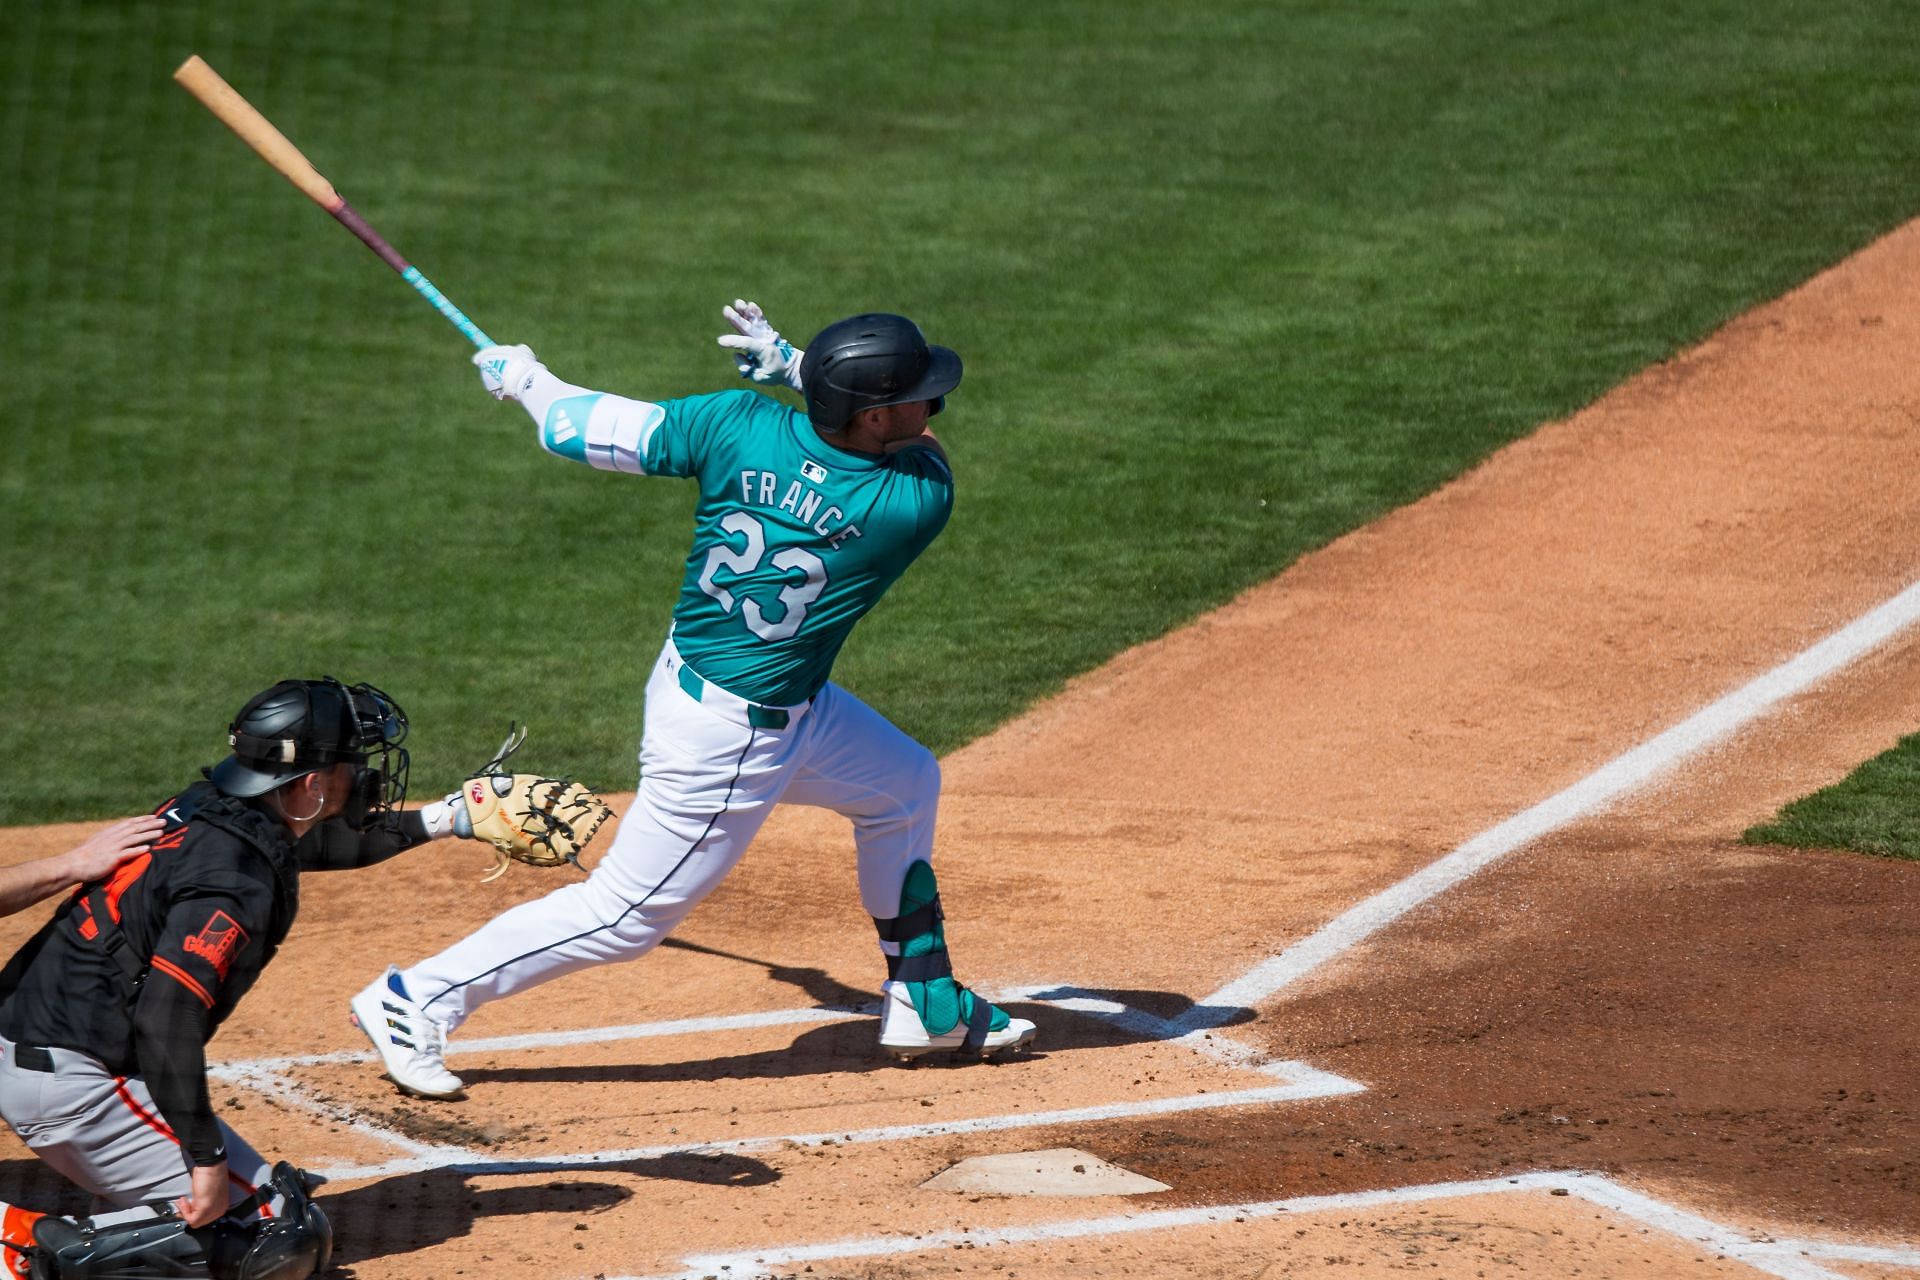 Can the Mariners get back to the postseason?